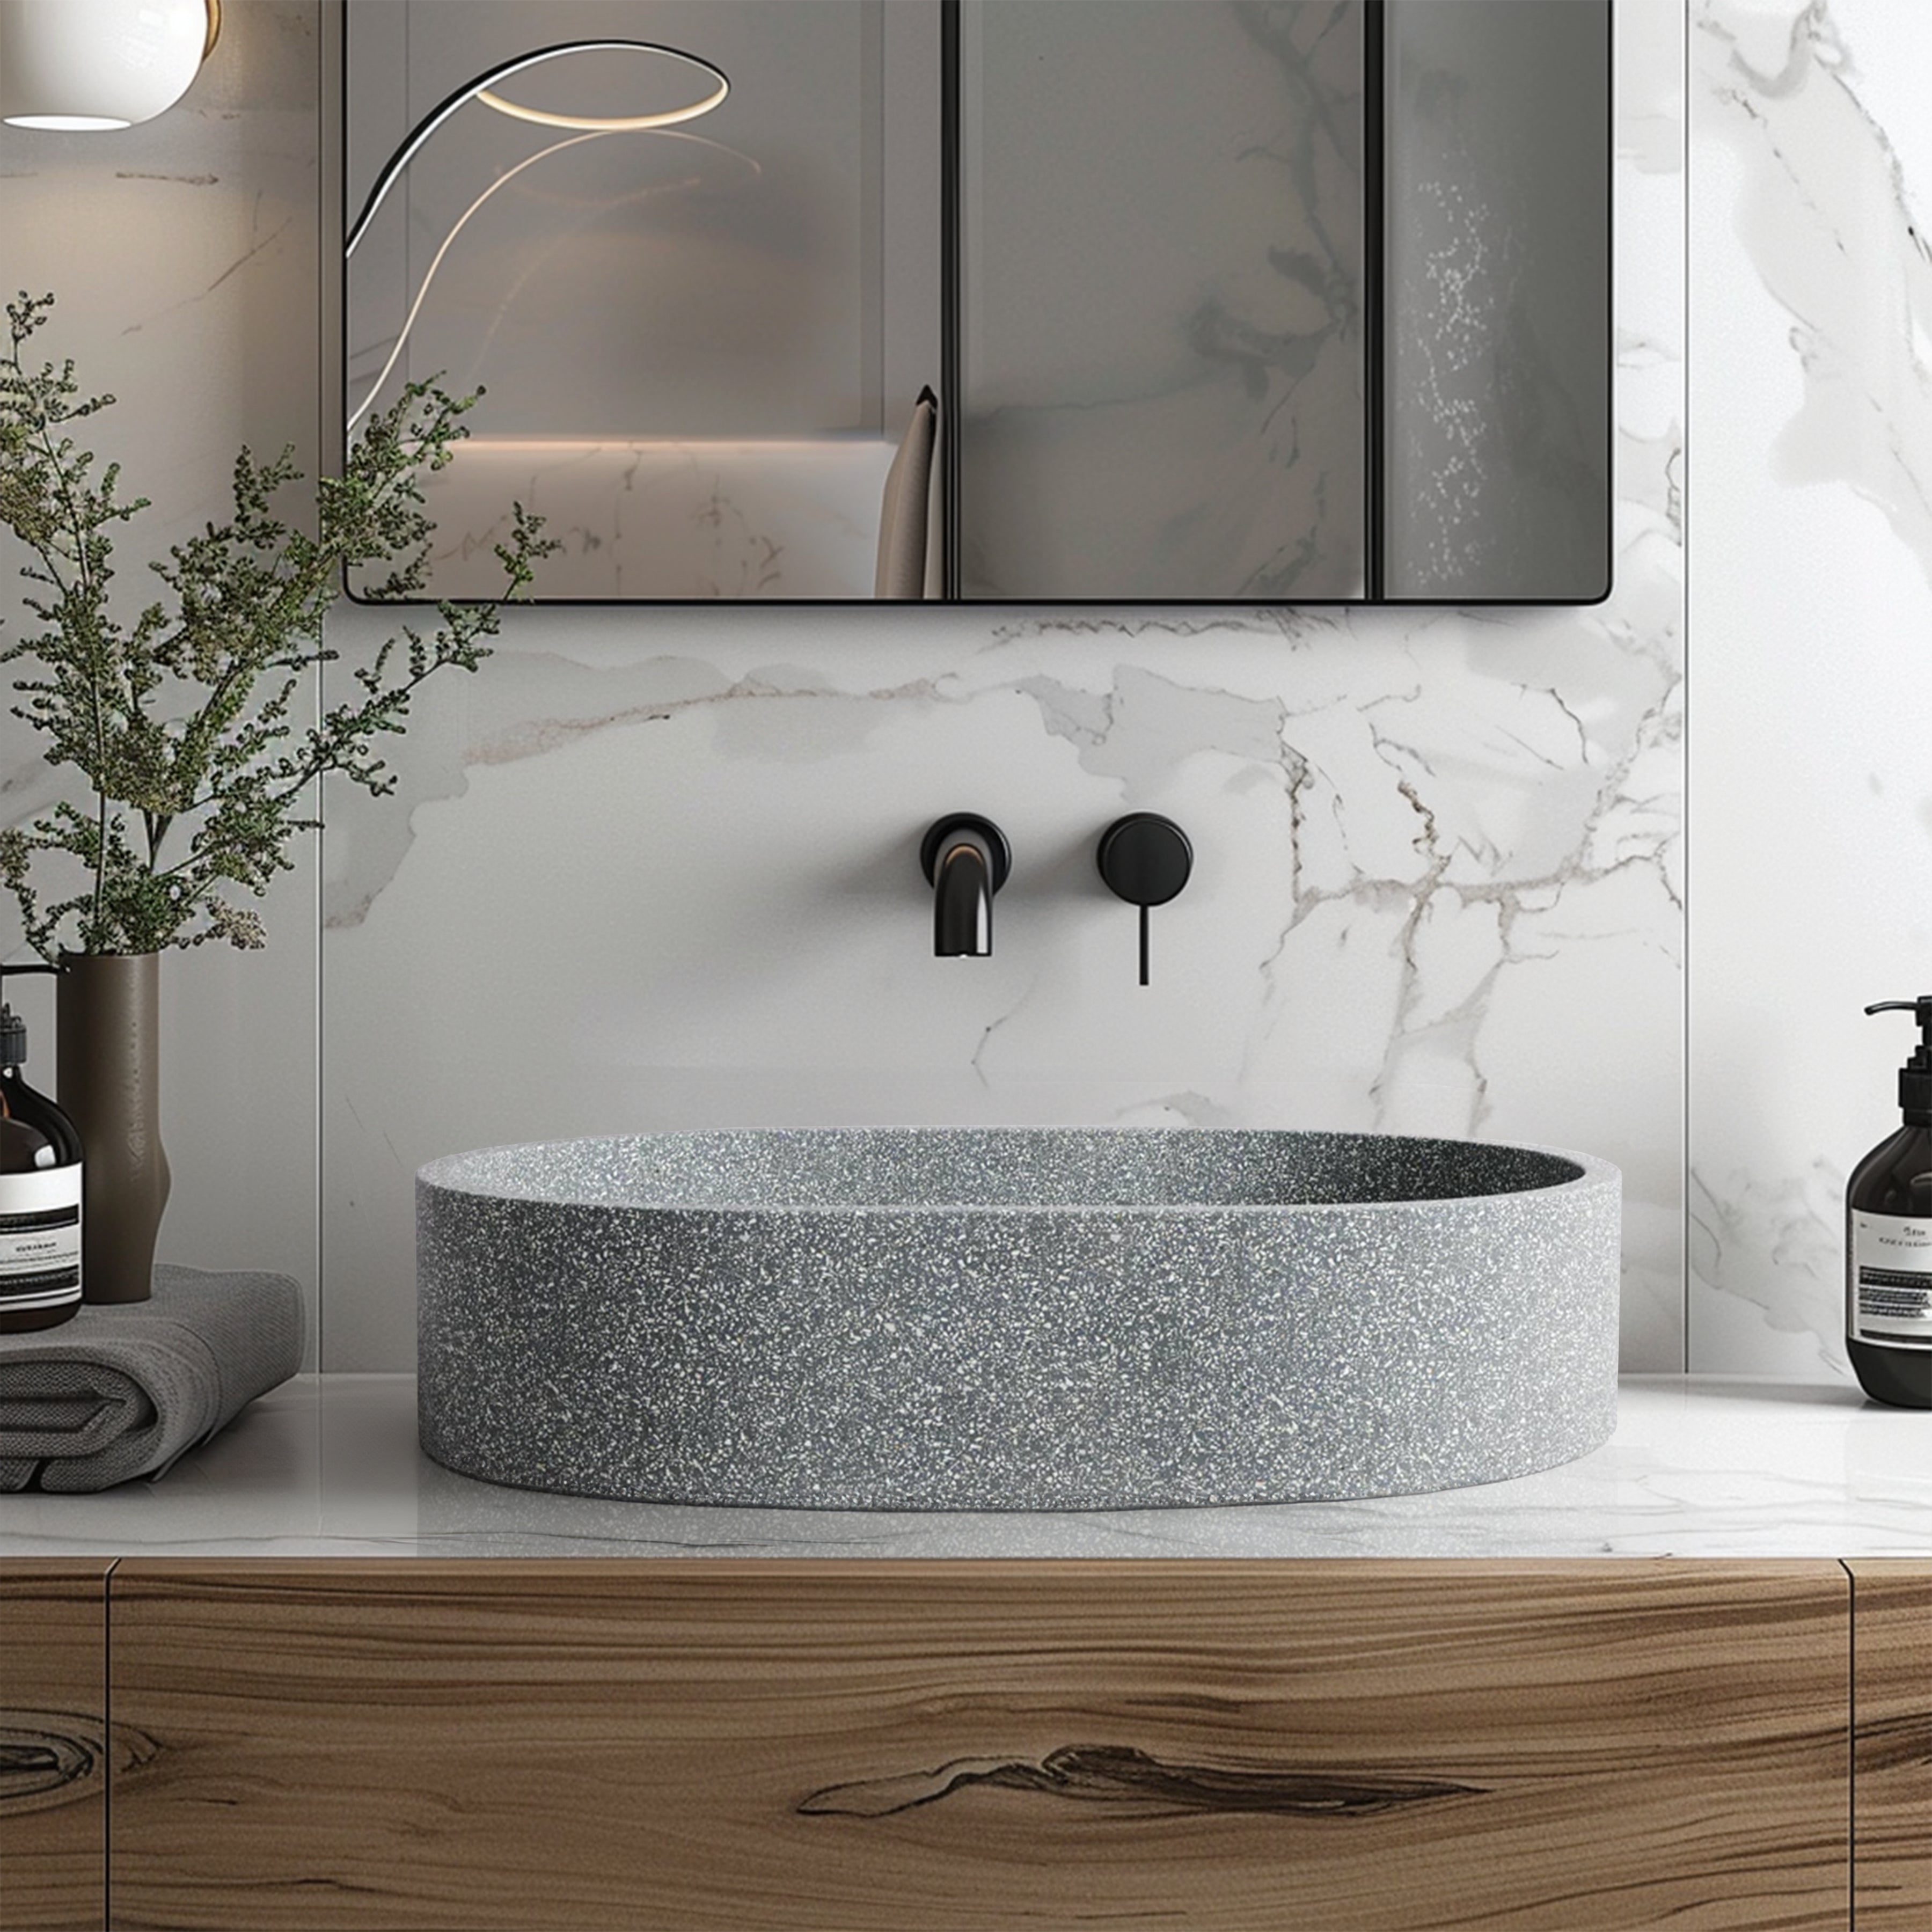 MADU MARGO OVAL ABOVE COUNTER BASIN HANDCRAFTED TERRAZO STONE SEAMLESS EDGE GREY 590MM